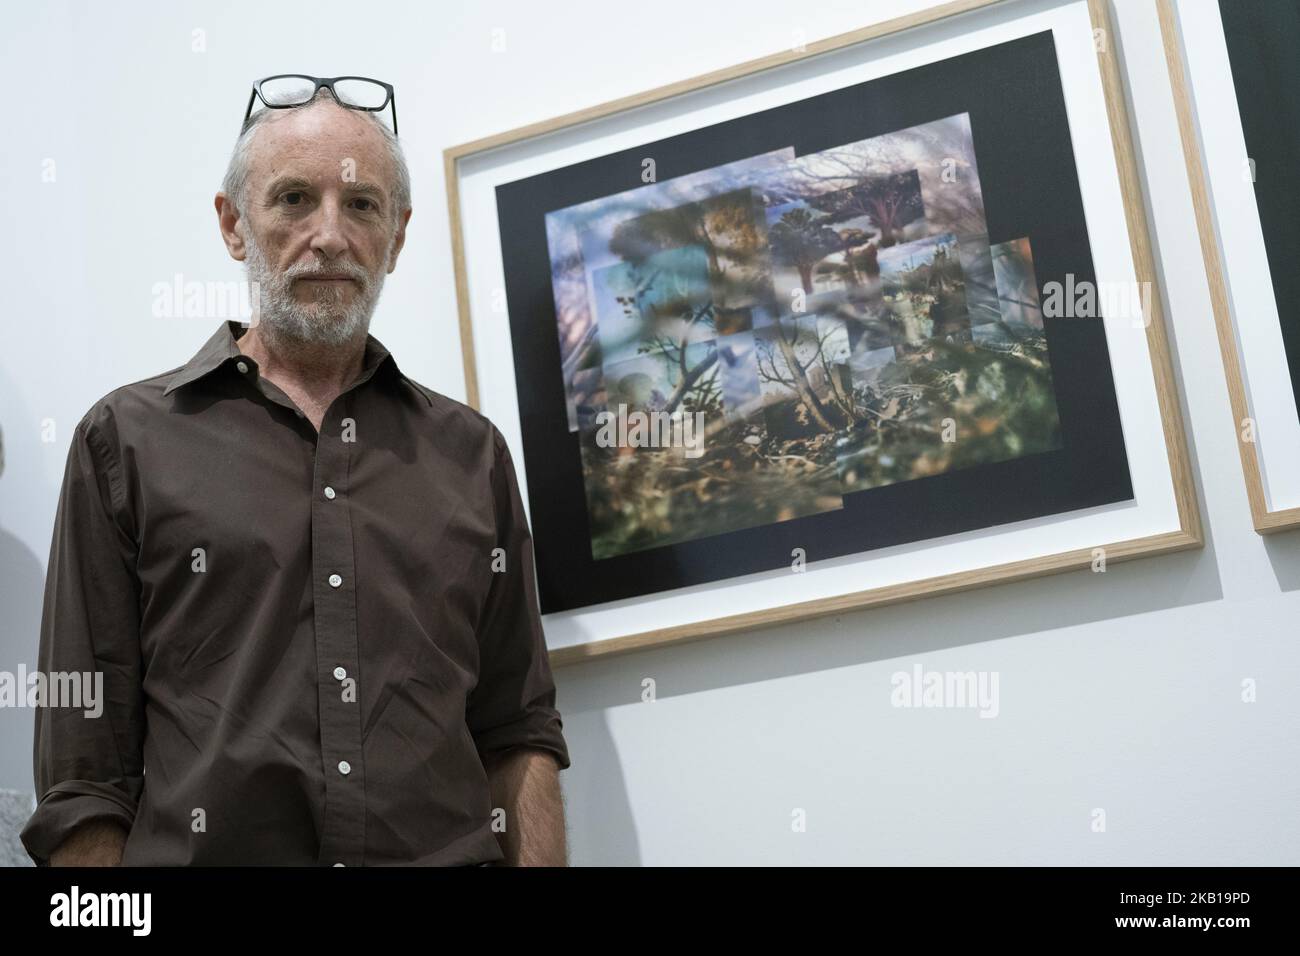 Spanish photographe Javier Vallhonrat attends the presentation of the exhibition 'Twelve photographers' at the Prado Museum in Madrid, Spain, 20 September 2018. On the occasion of the Bicentennial of the Prado Museum, the Foundation Amigos del Museo del Prado (Prado Museum's Friends Foundation) has invited twelve contemporary photographers to work with artworks displayed at the museum. The result is twenty-four photographs collection that tells the photographers' own view of some of the pieces treasured by the Prado Museum. The event will run from 21 September 2018 to 13 January 2019 (Photo by Stock Photo